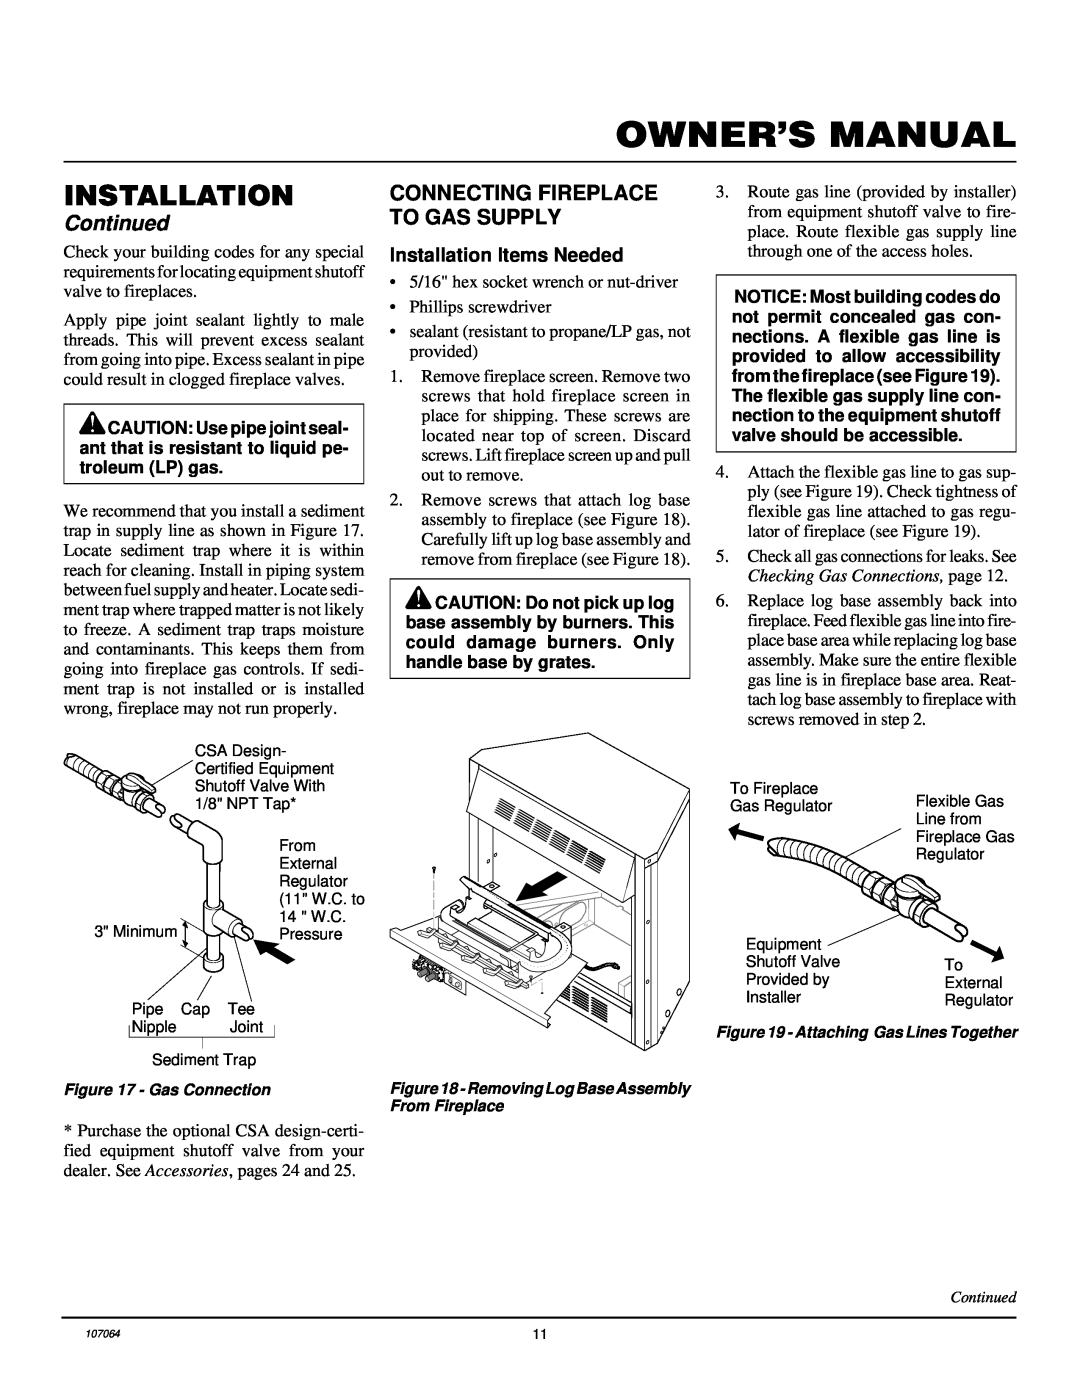 Desa LFP33PRA installation manual Connecting Fireplace To Gas Supply, Continued, Installation Items Needed 